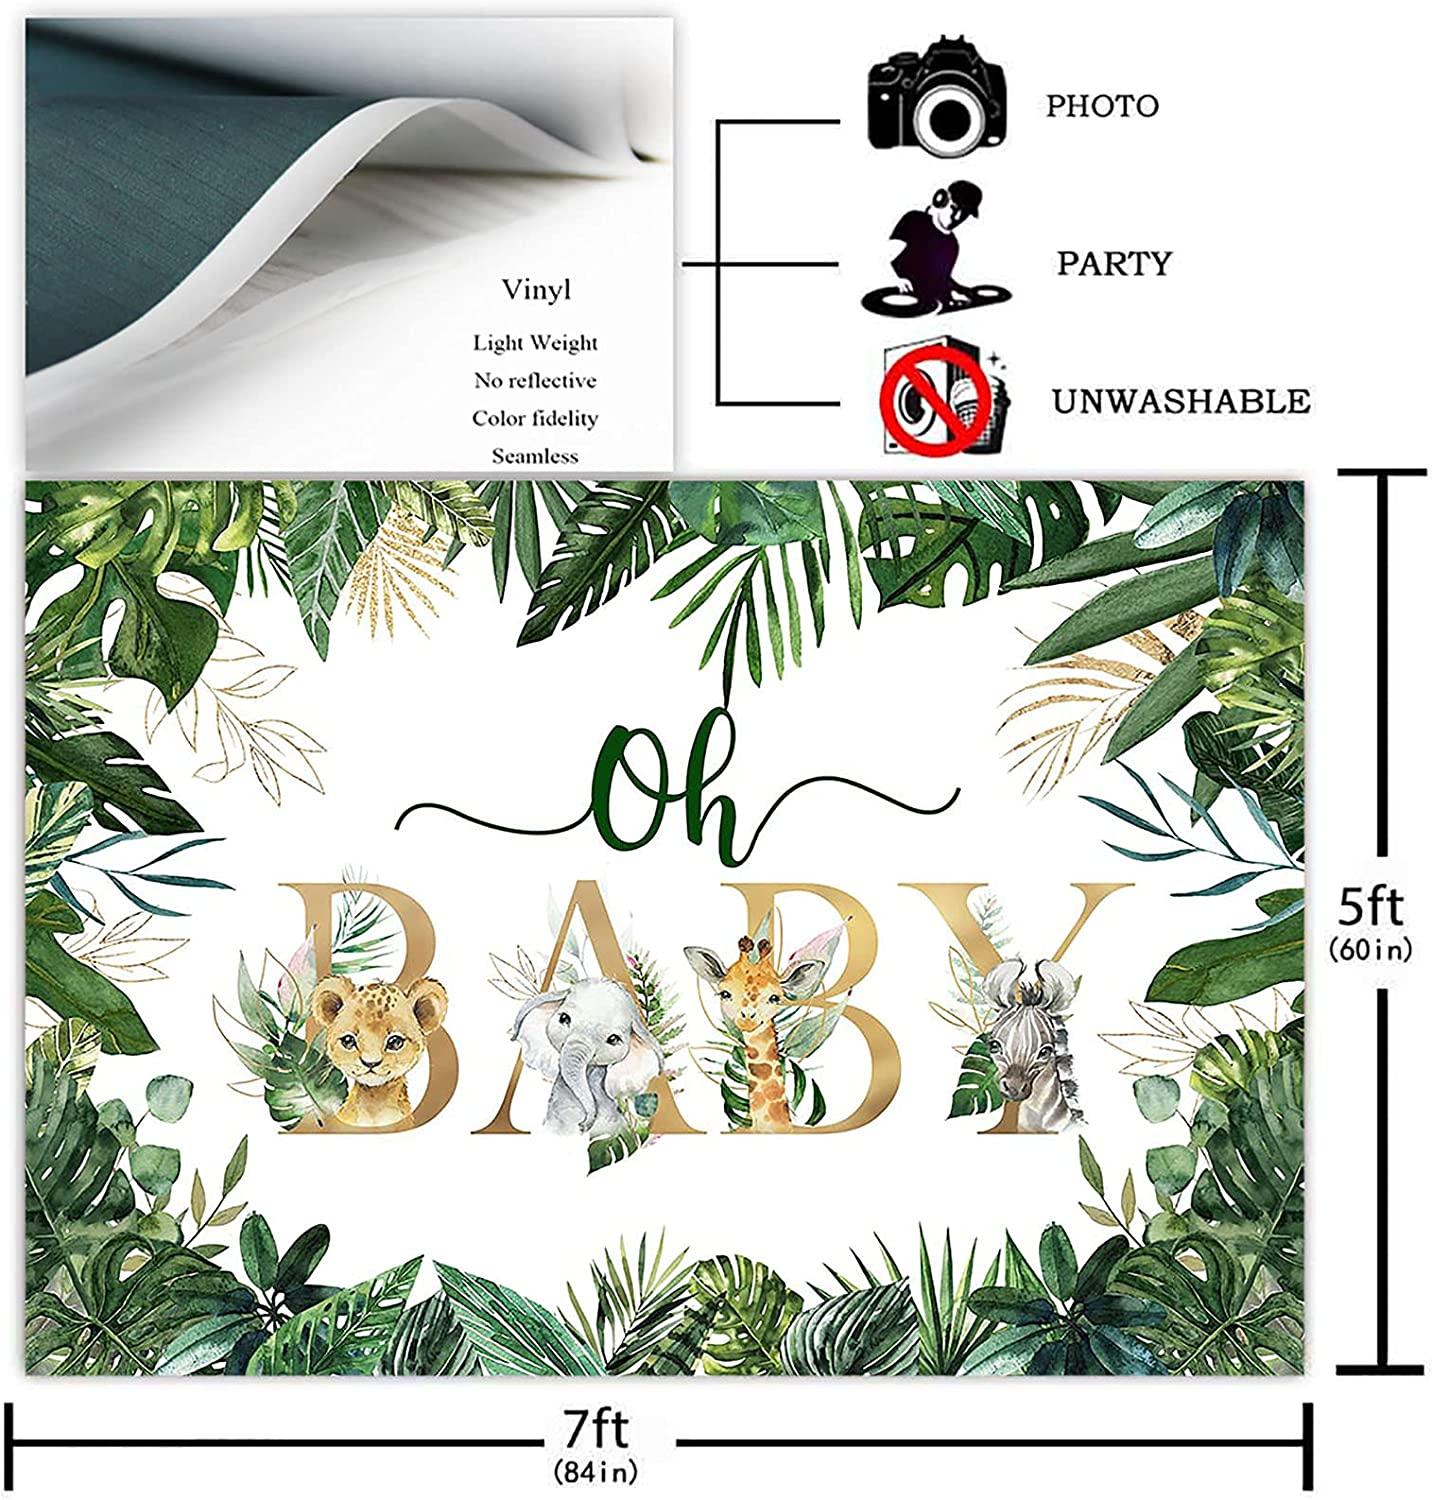 Jungle Animals Oh Baby Backdrop for Baby Shower Decoration Photography Background - Decotree.co Online Shop